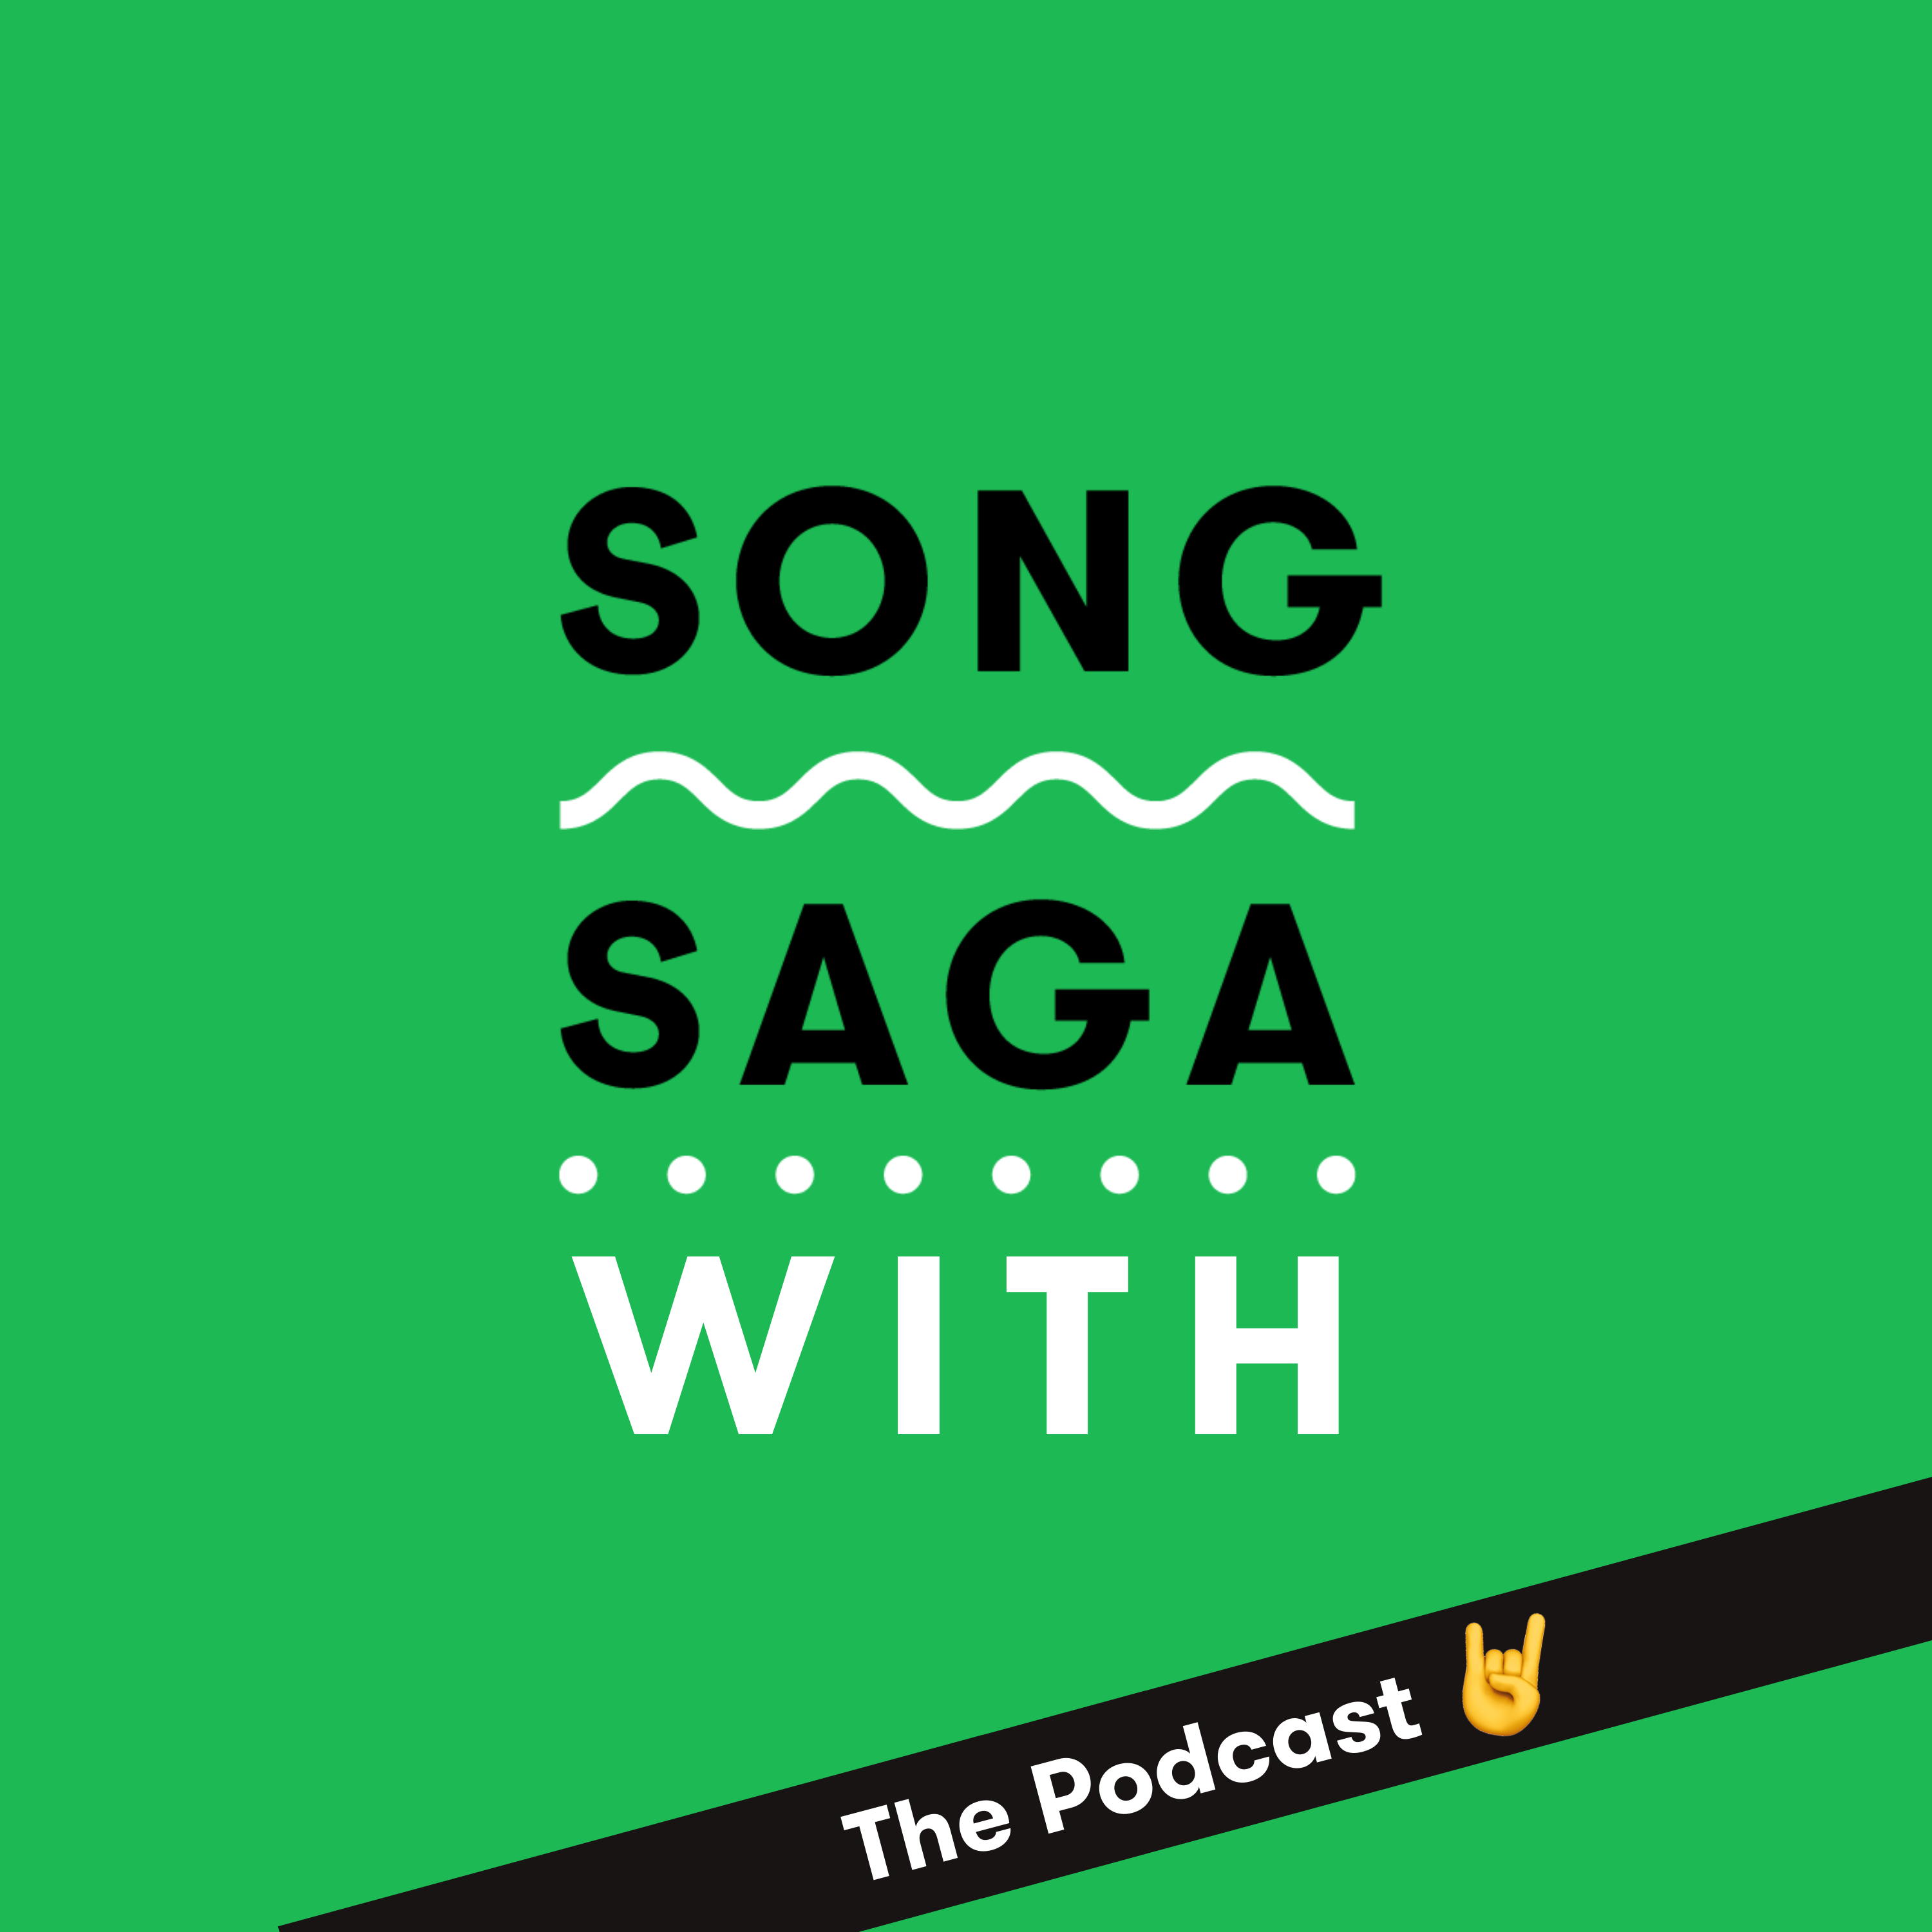 Song Saga Game, Music Game, Story Game, Party Game, Best Party Games, SongSaga, Green Box that Rocks, Card Game, Cards, You Rock Game, Conversation Starters Game, Spotify Game, best card games, best party games, music game, story game, Song Saga podcast